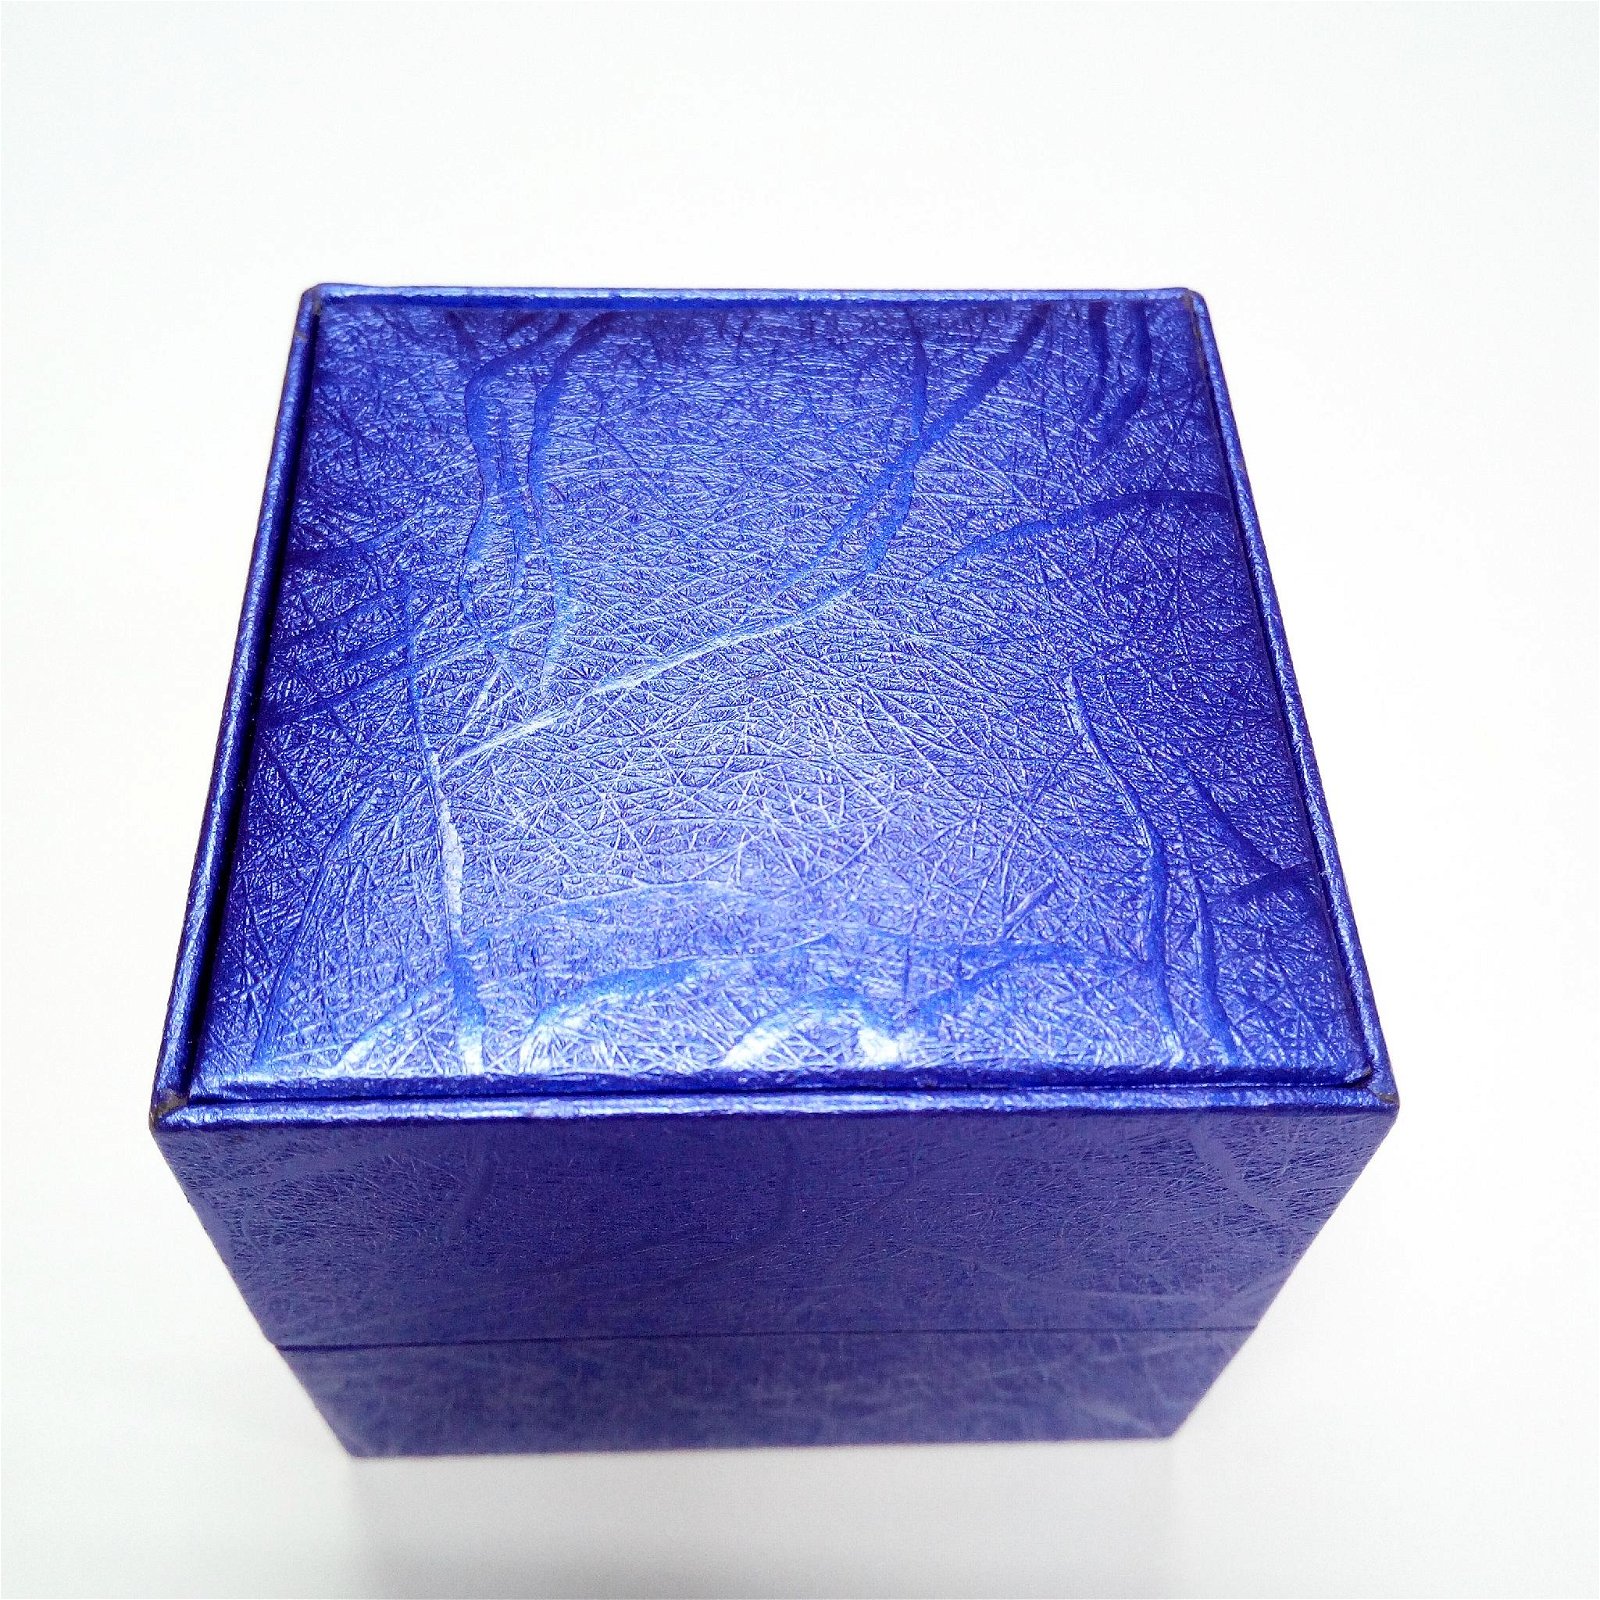 Jewelry ring leather box 4